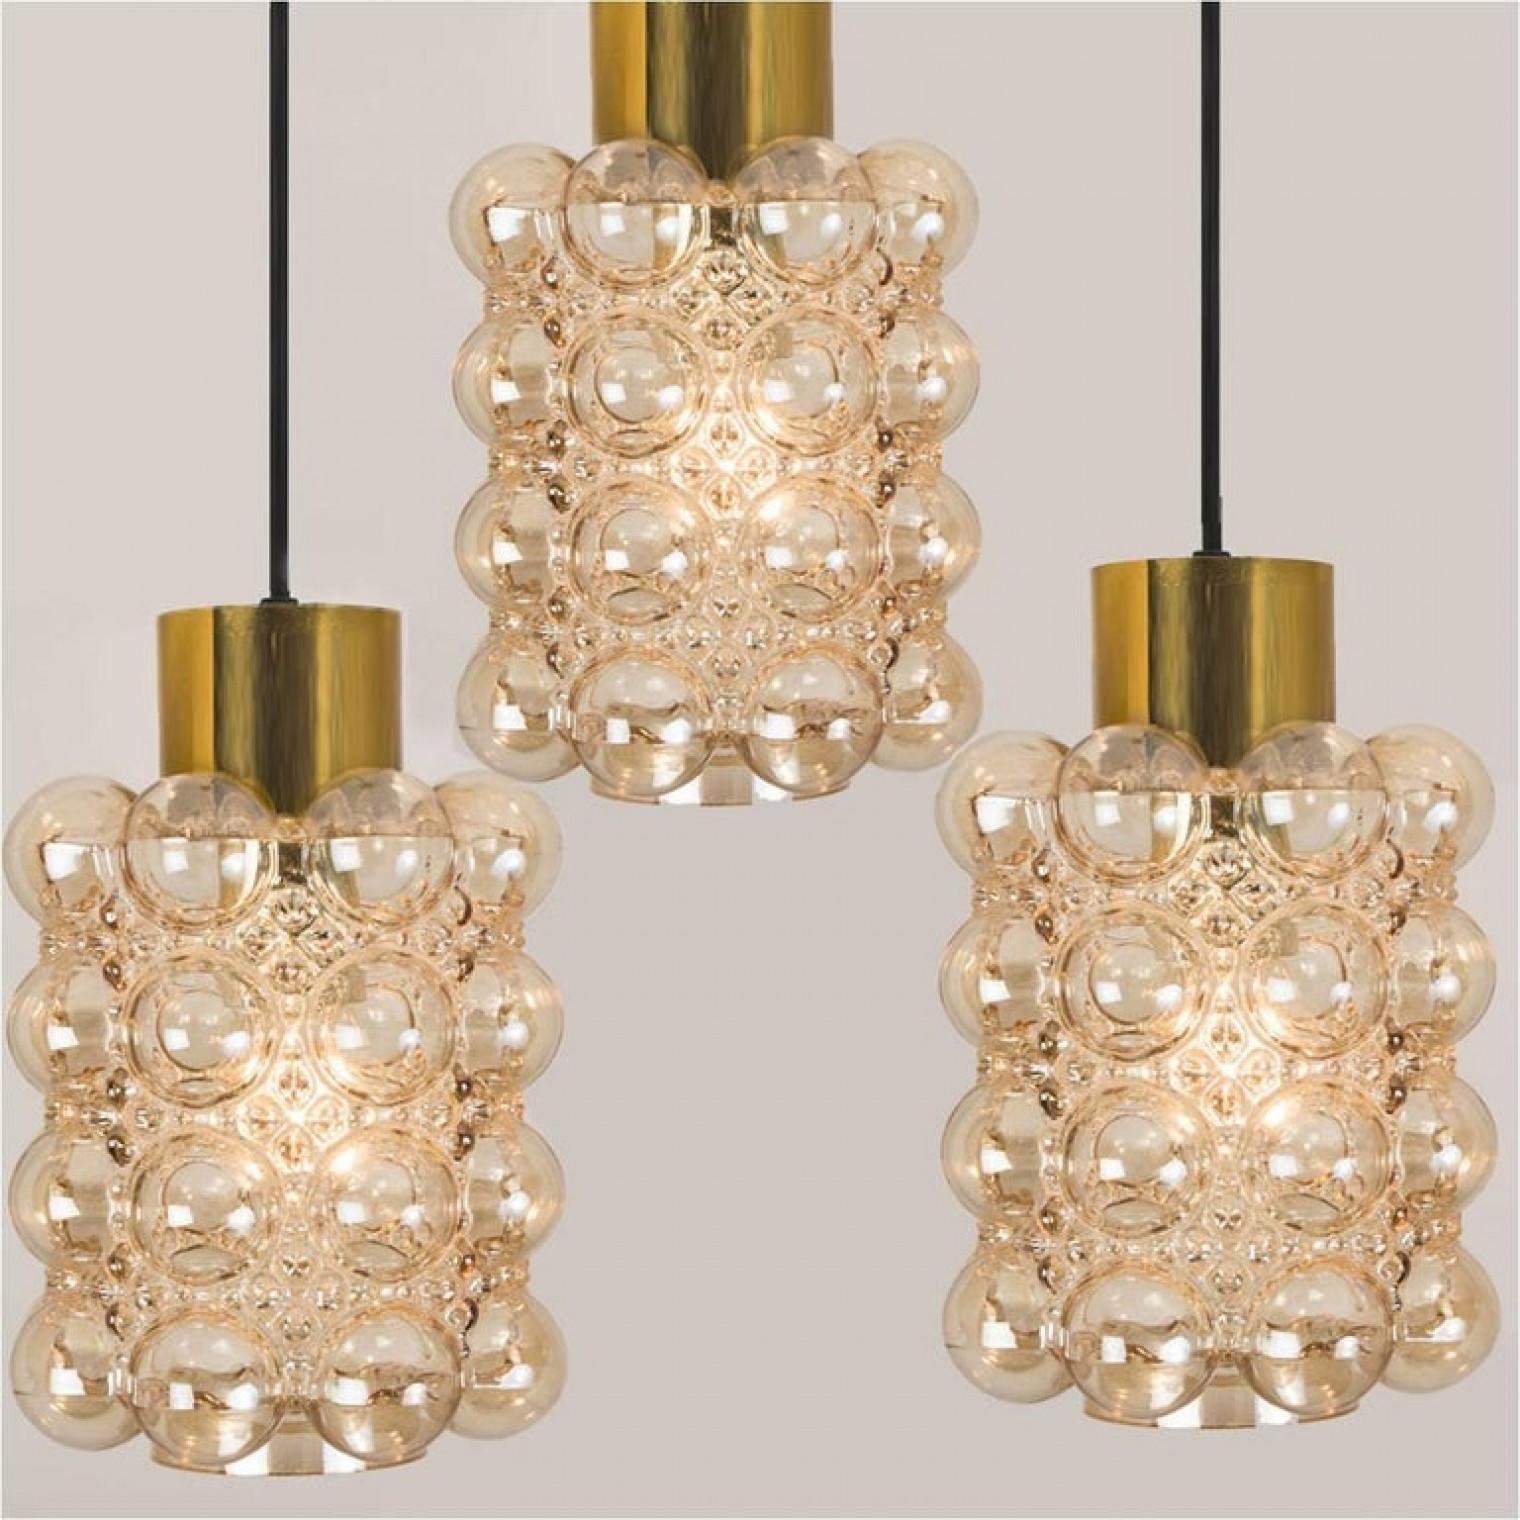 Three beautiful bubble glass chandeliers or pendant lights designed by Helena Tynell for Glashütte Limburg. A design Classic, the amber colored/toned hand blown glass gives a wonderful warm glow.

Please notice the price is for 1 piece. 3 pieces